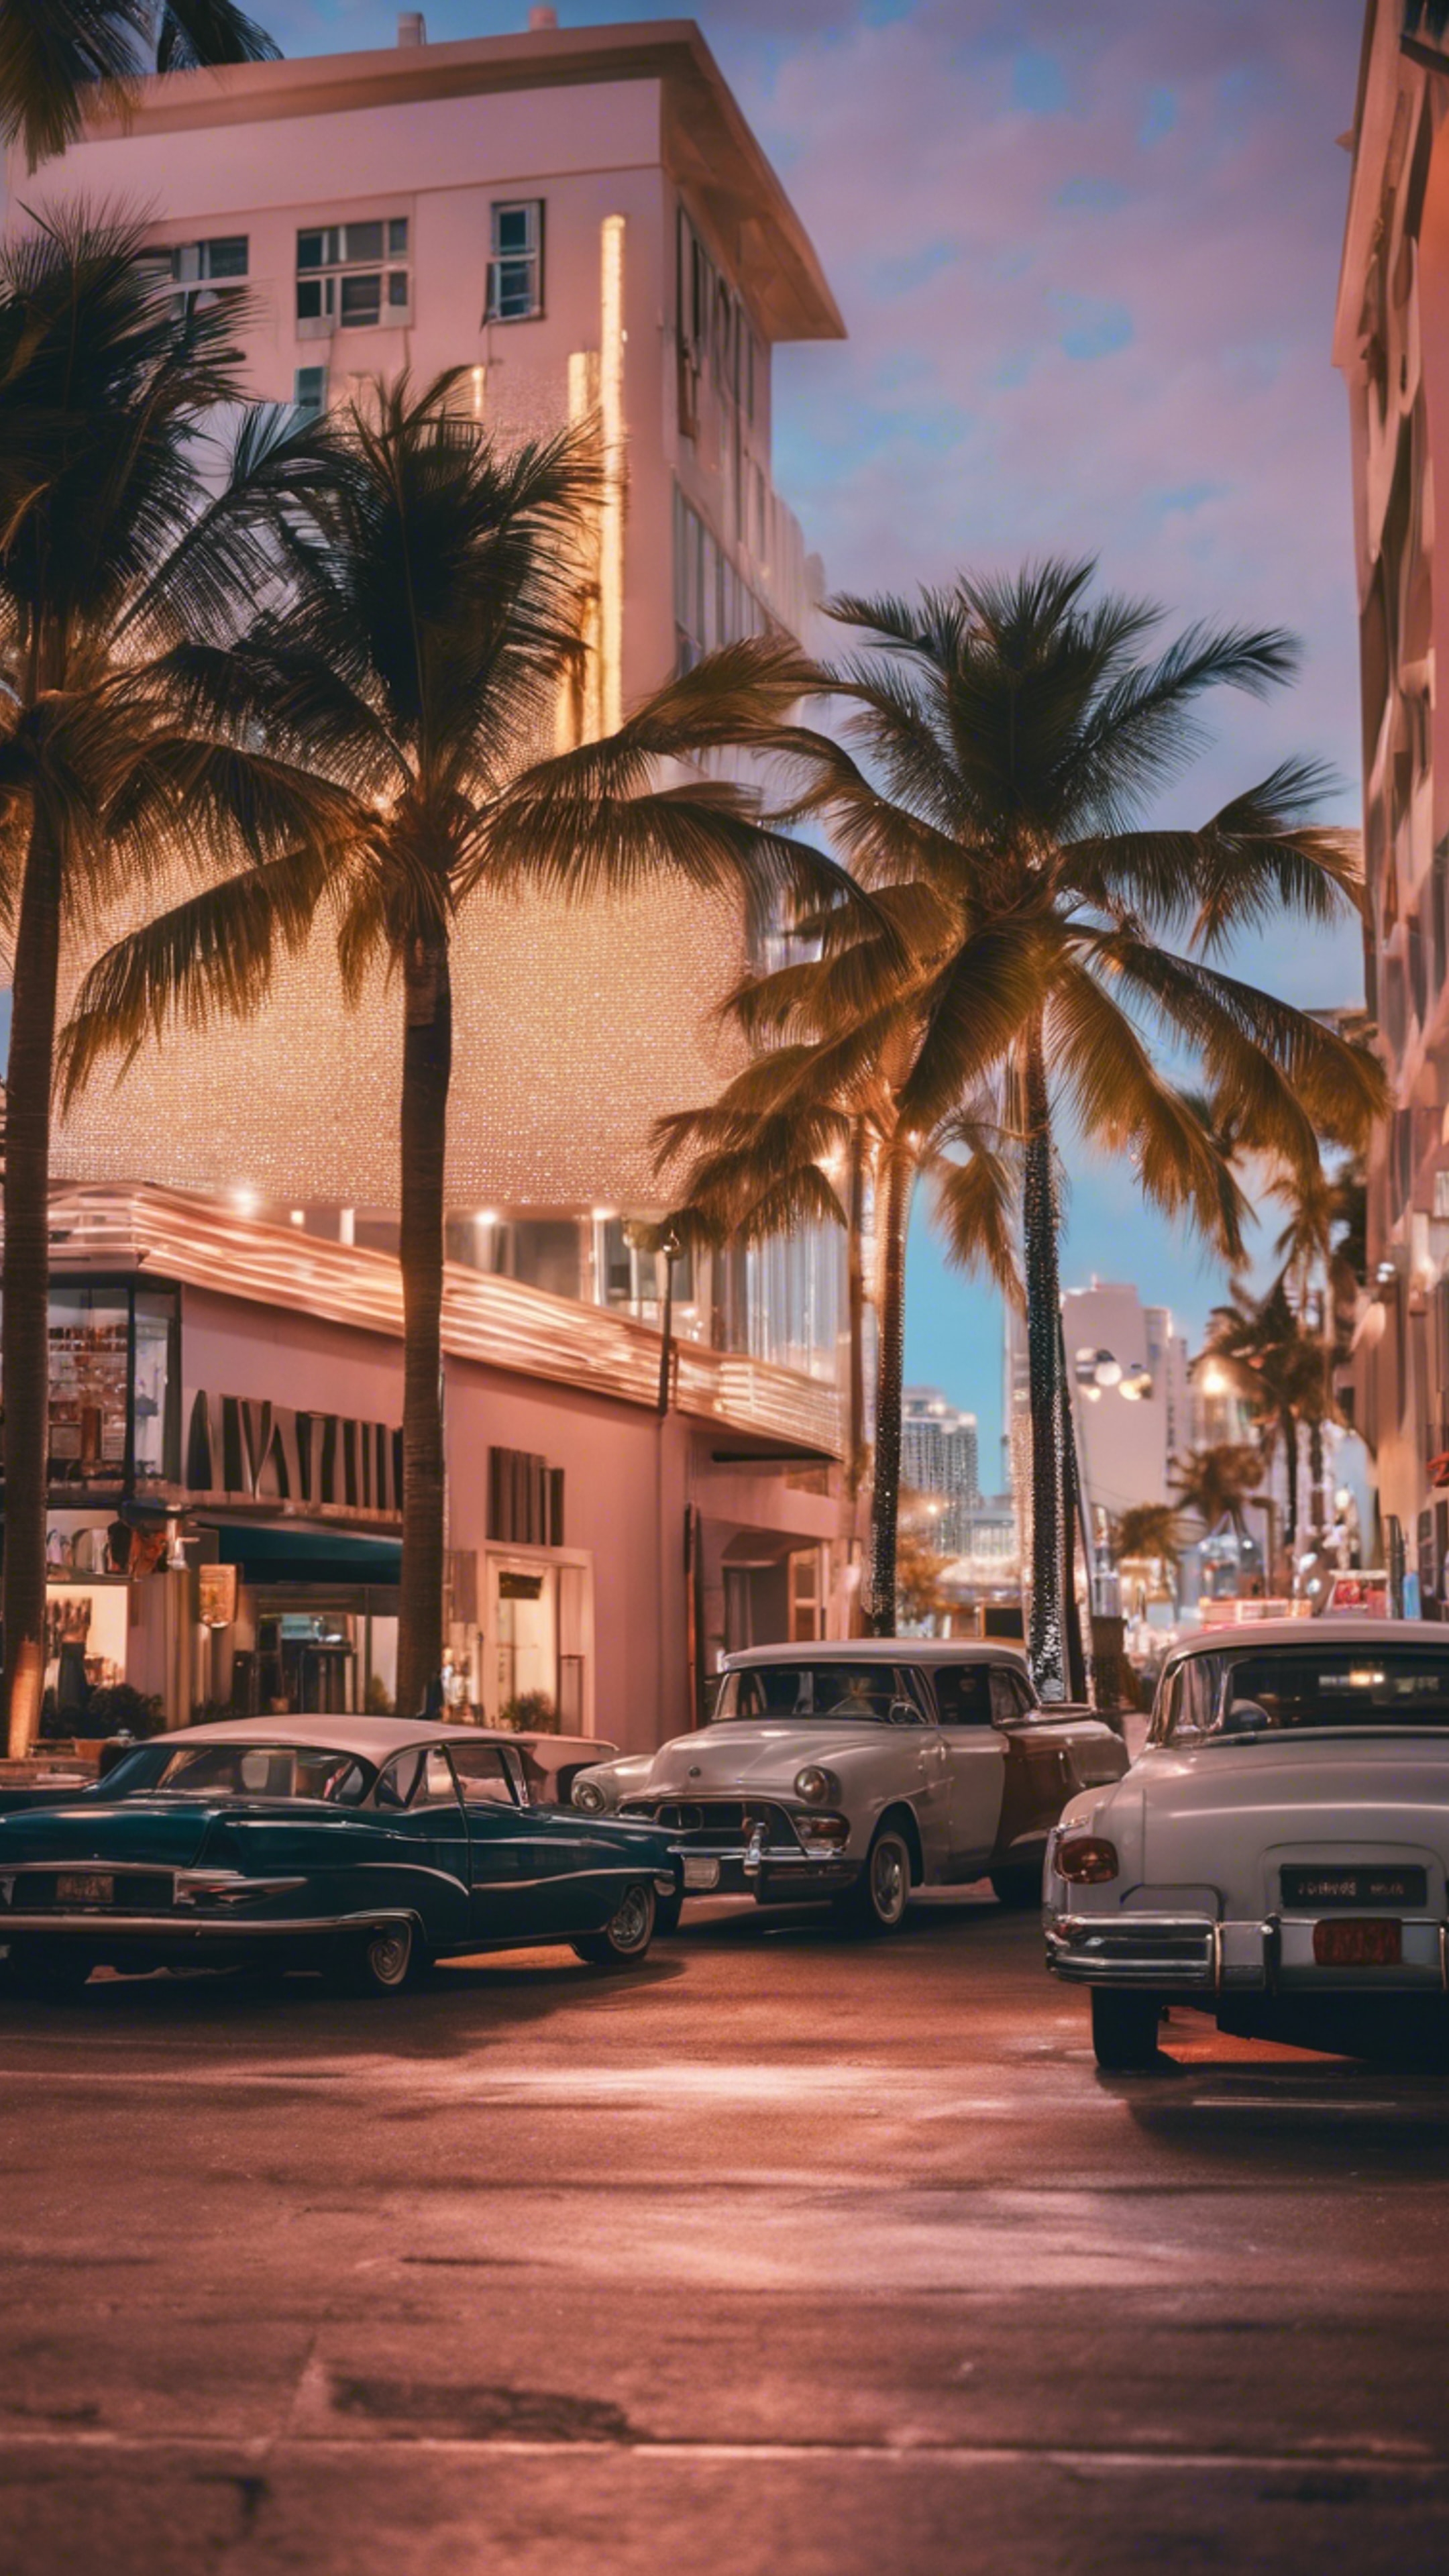 A bustling Miami Beach street scene, with art deco buildings and palm trees, vibrant nightlife atmosphere. Wallpaper[c899e7f744884bb387cd]